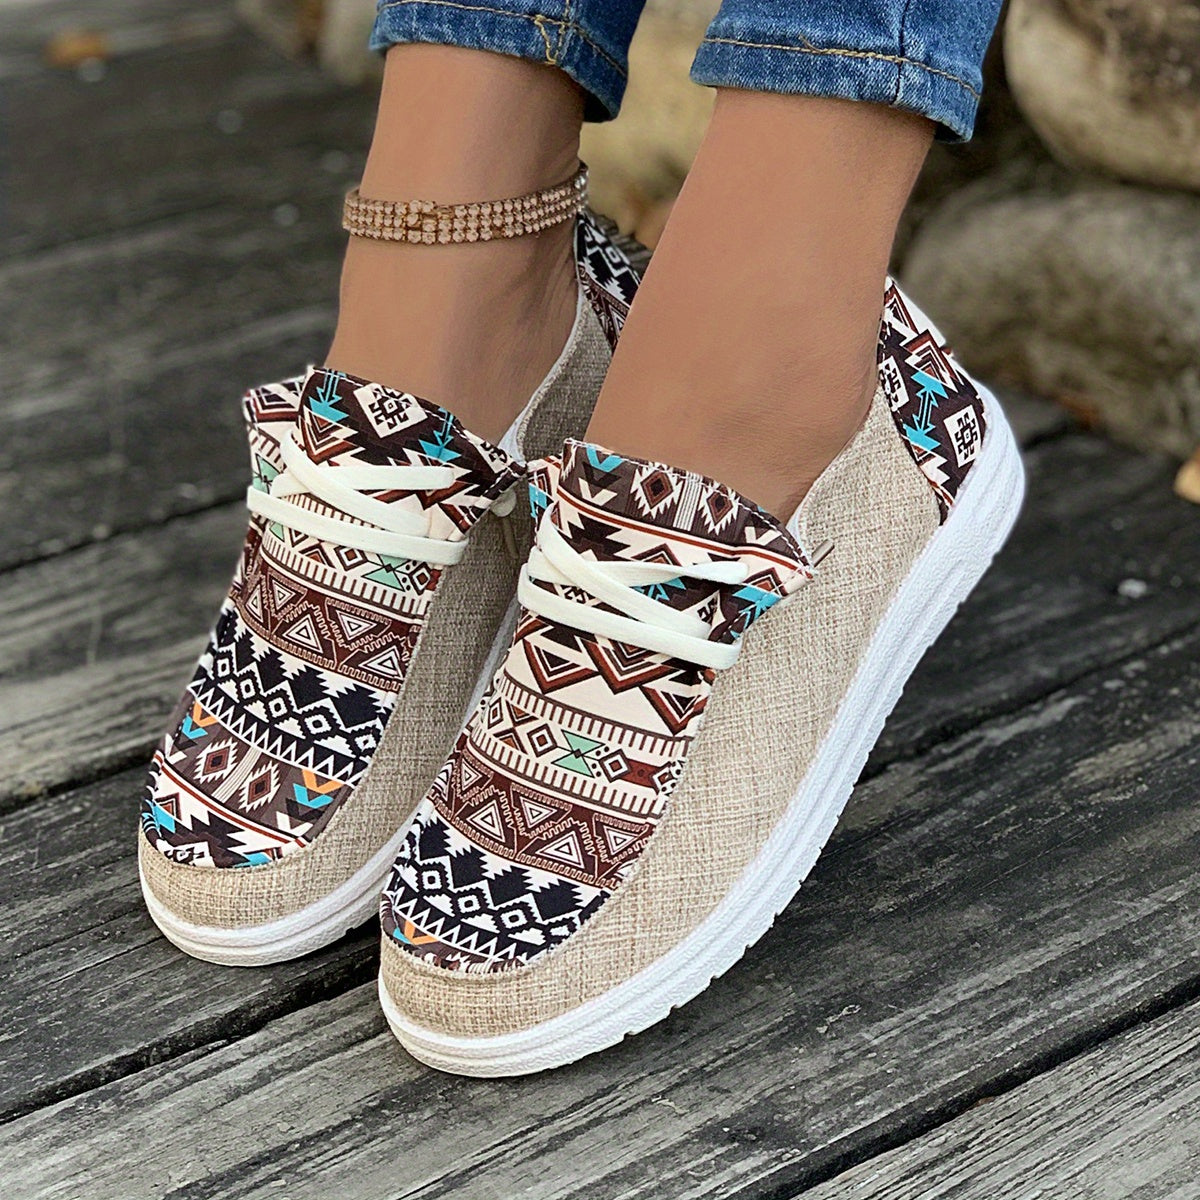 Women's Tribal Pattern Canvas Shoes, Casual Round Toe Low Top Flat Sneakers, Lightweight Outdoor Walking Shoes